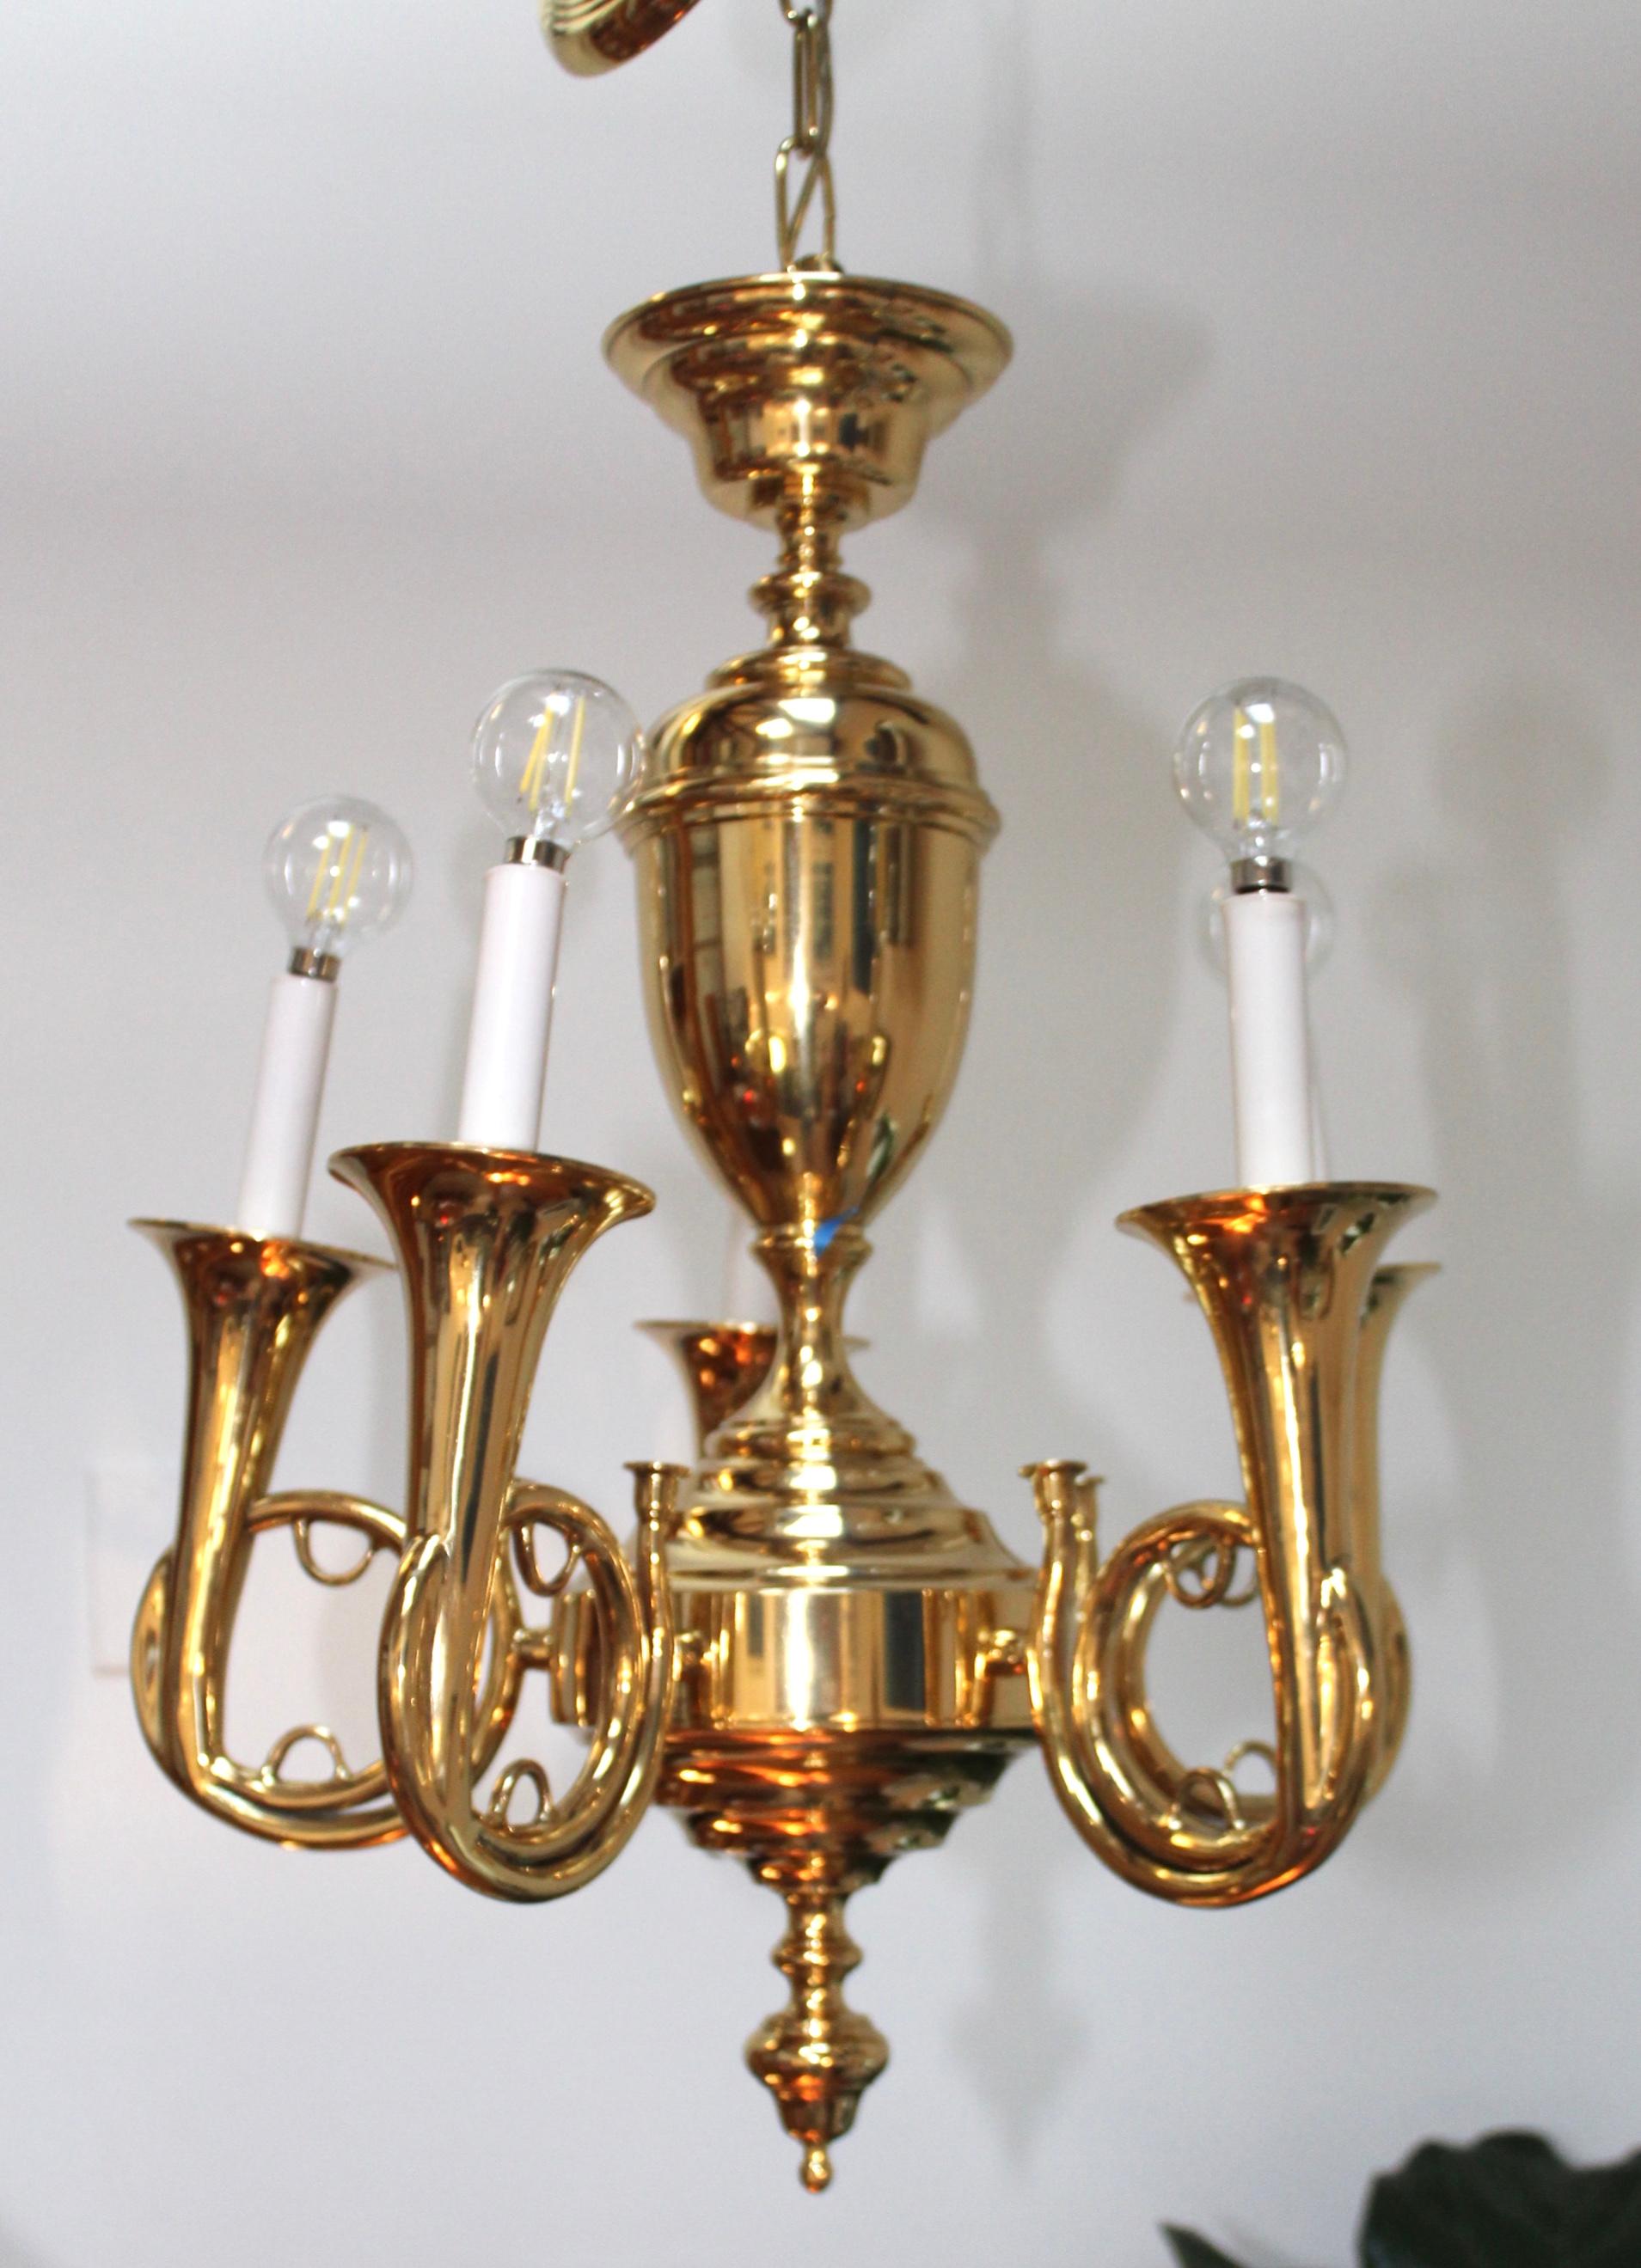 1970s modern trumpet brass chandelier by Chapman.

Height can be adjusted.